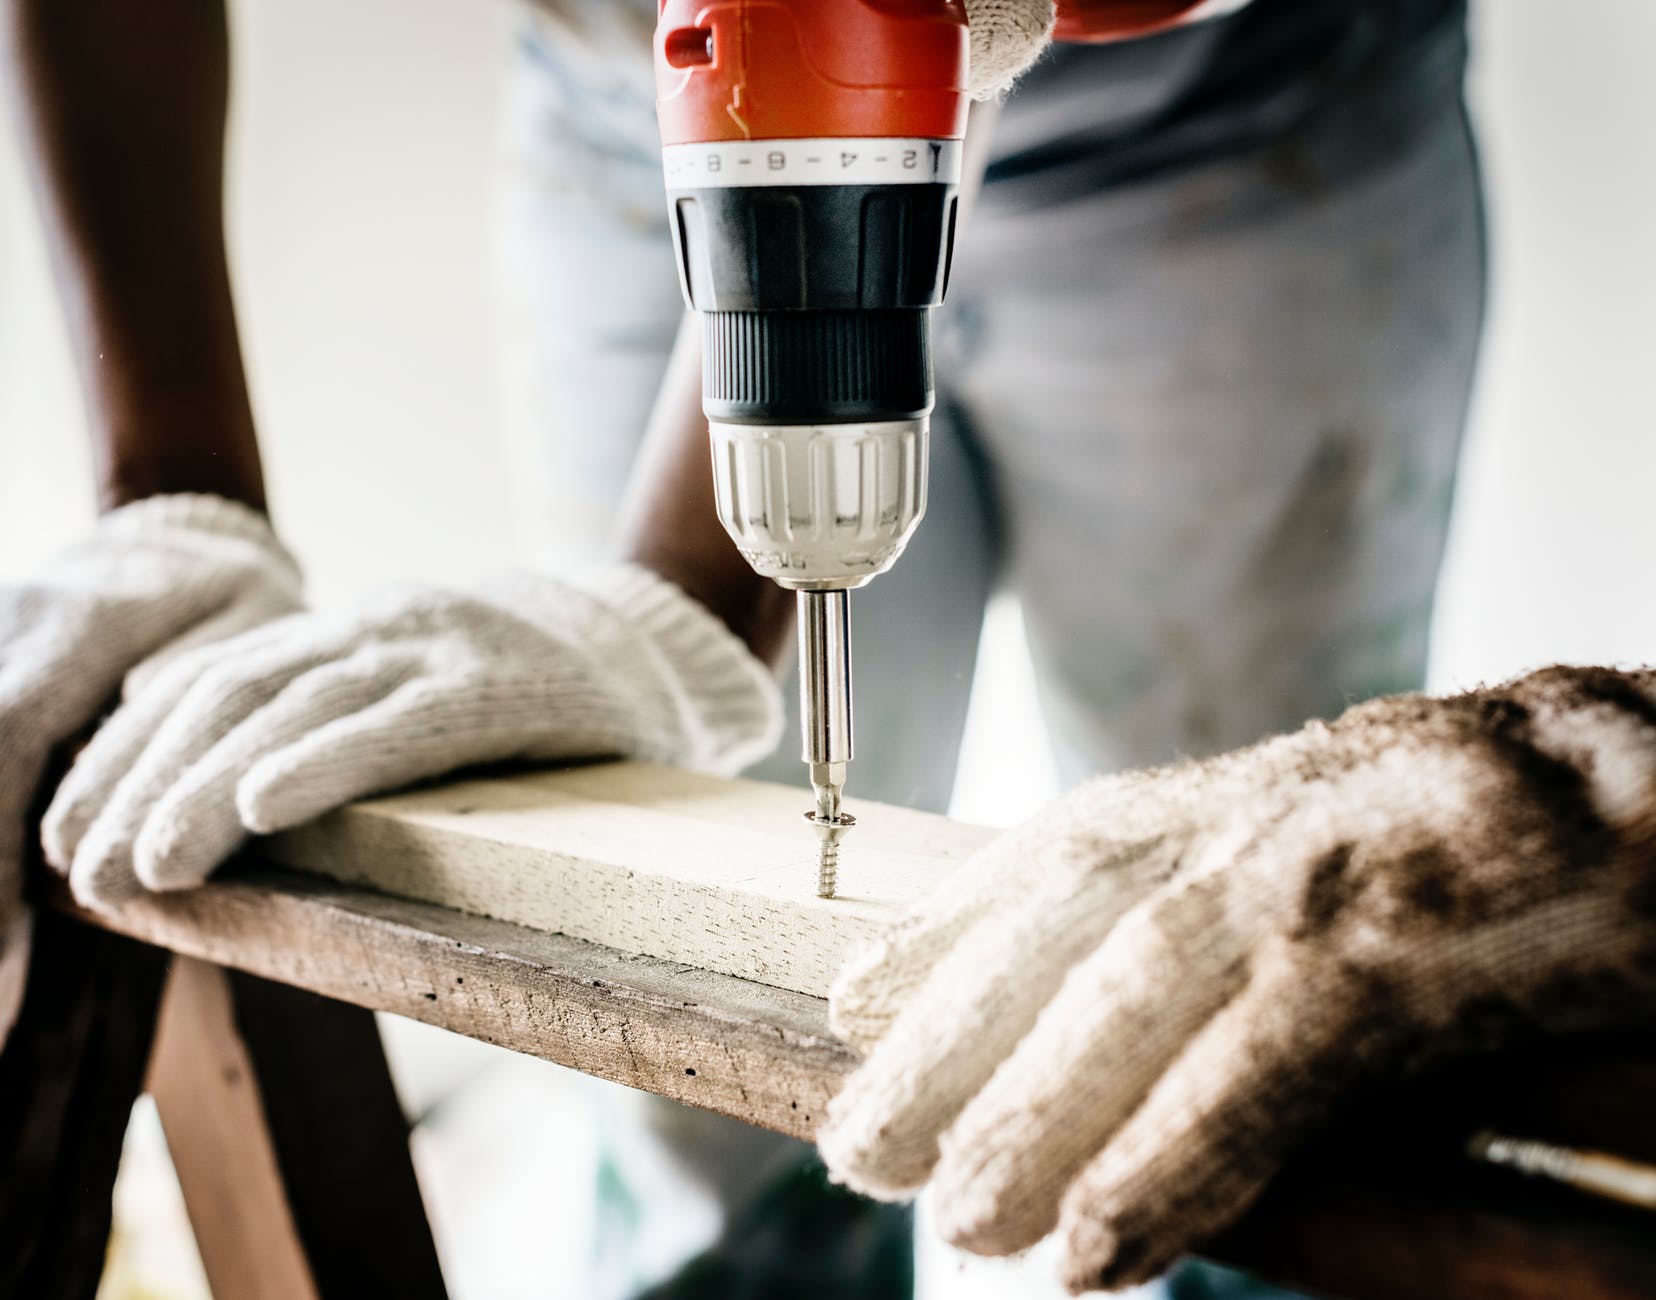 8 Safety Precautions When Handling Power Tools